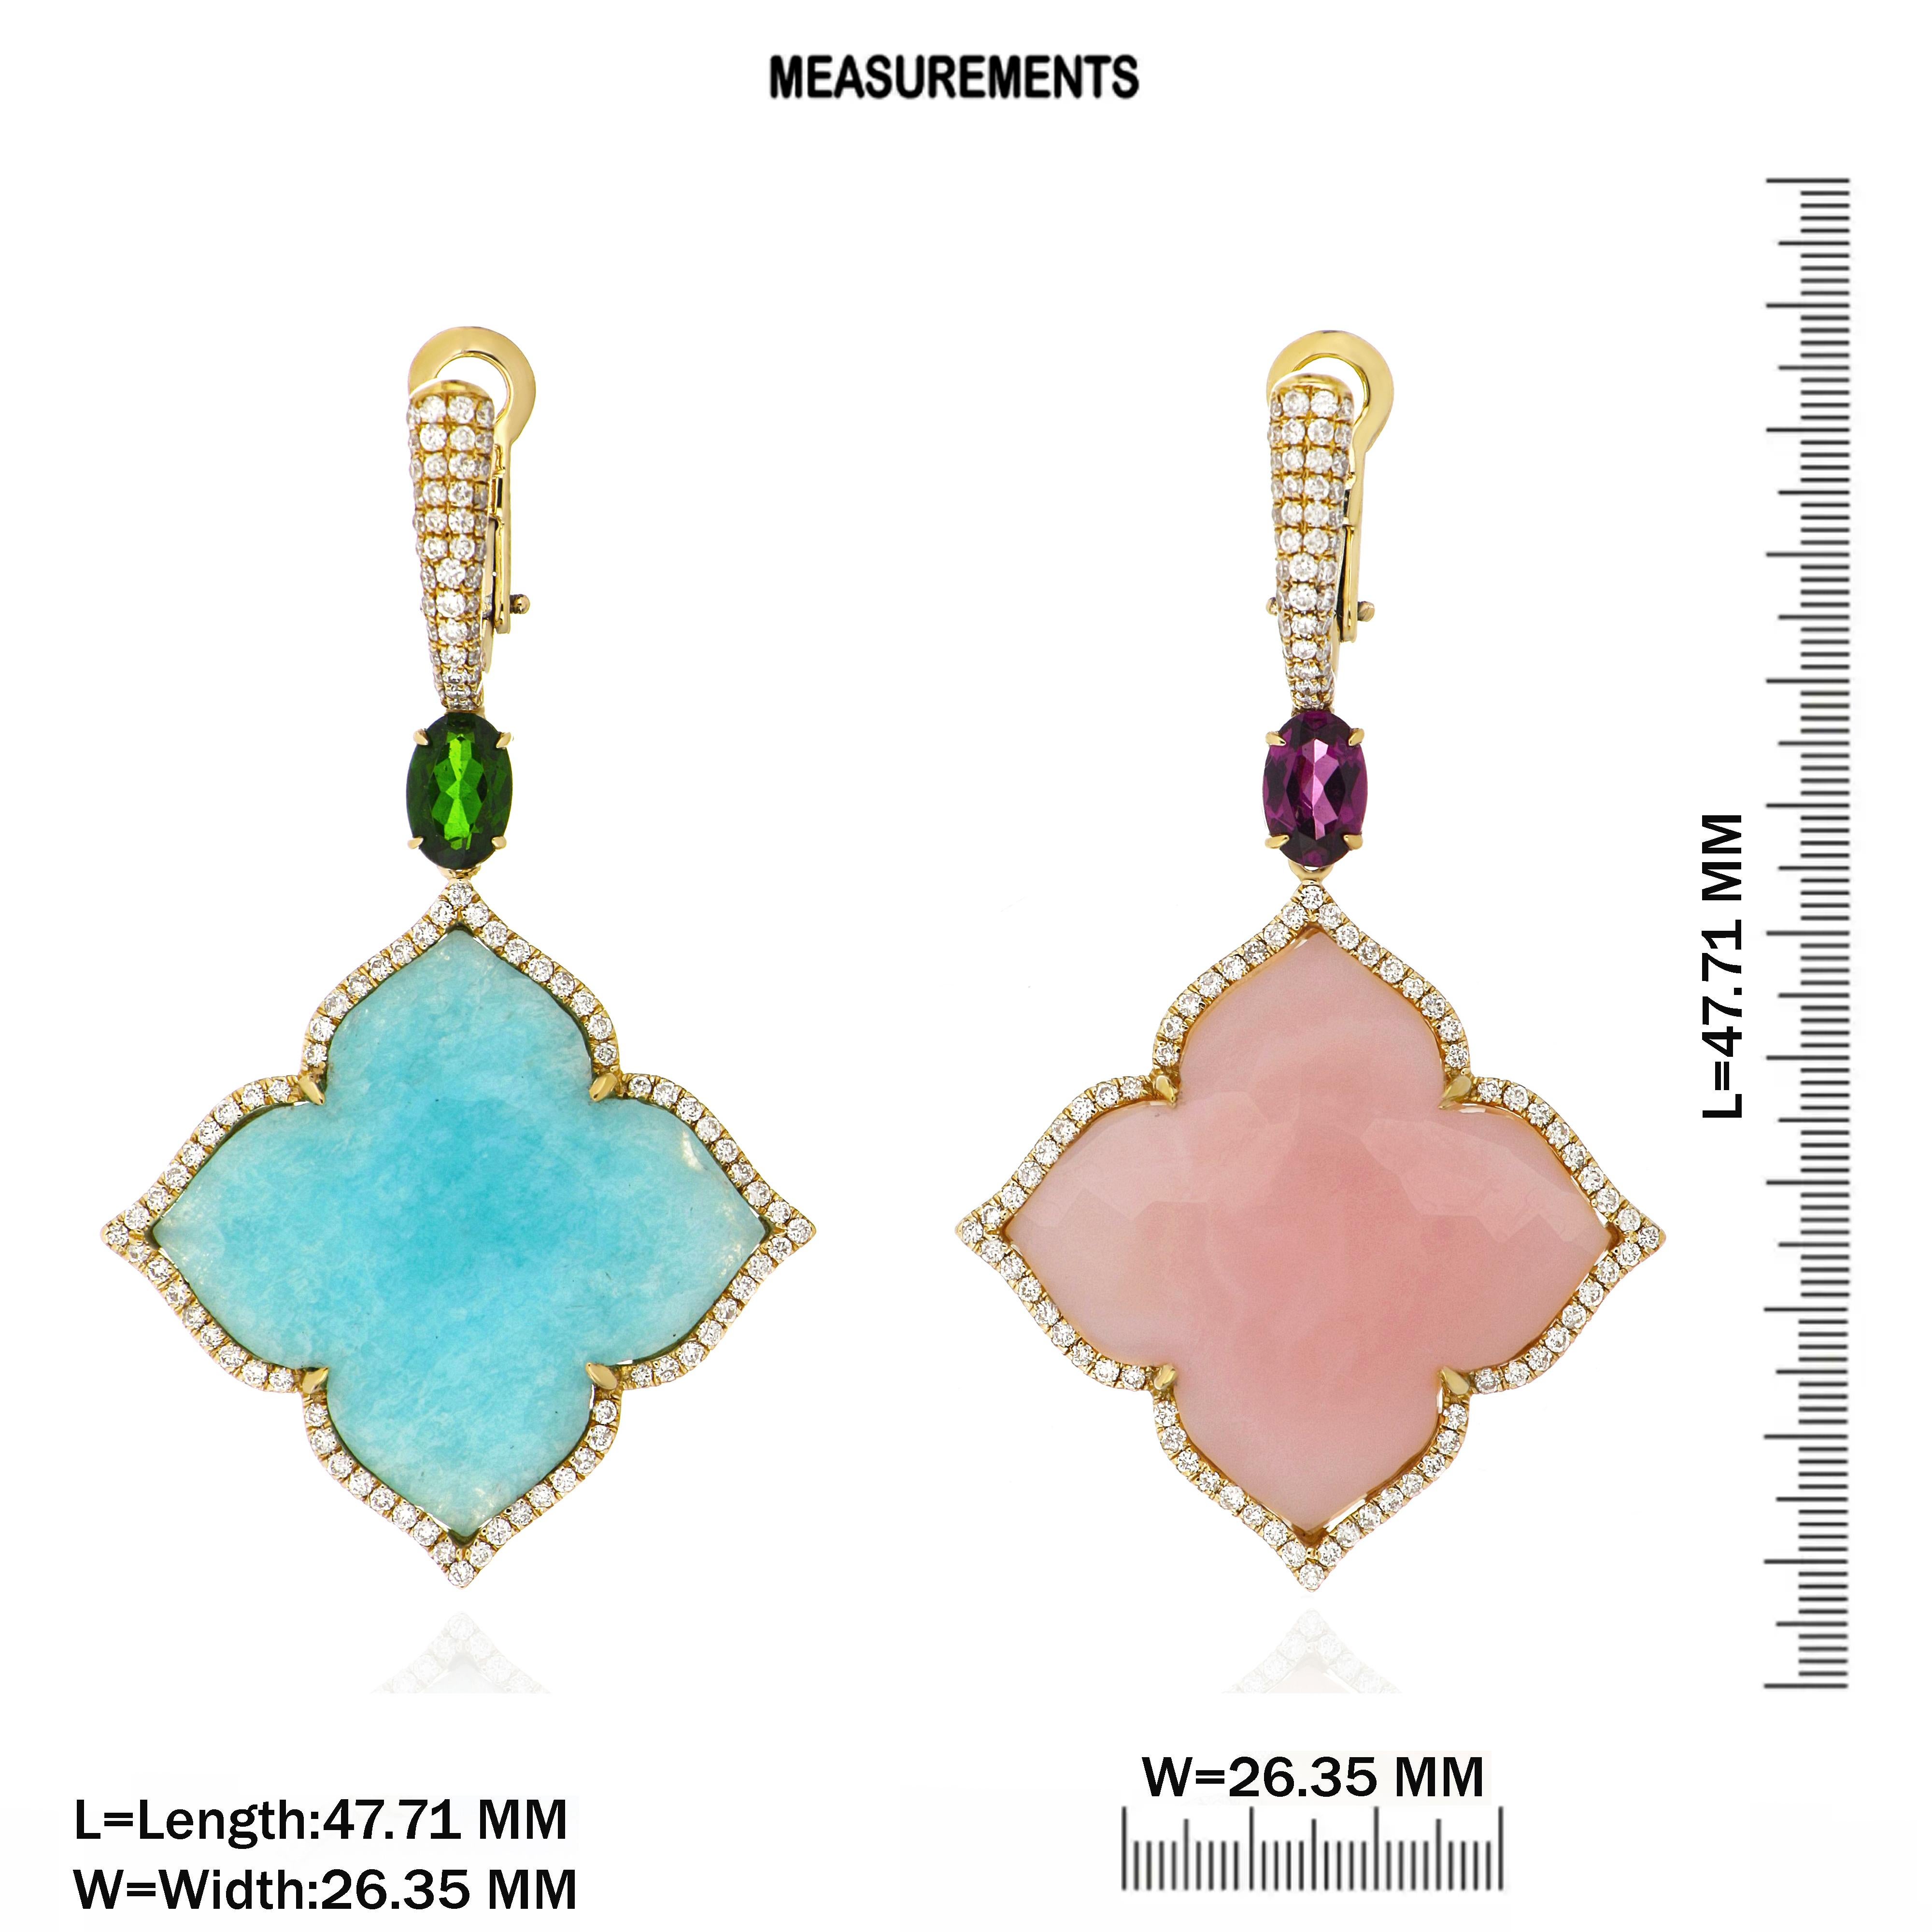 This collection is inspired by the Mughal Era and their influences on the architecture of the times.
The main motifs of this collection are derived from some of the most famous monuments of those times.
This Mismatched Pair of dangle earring is